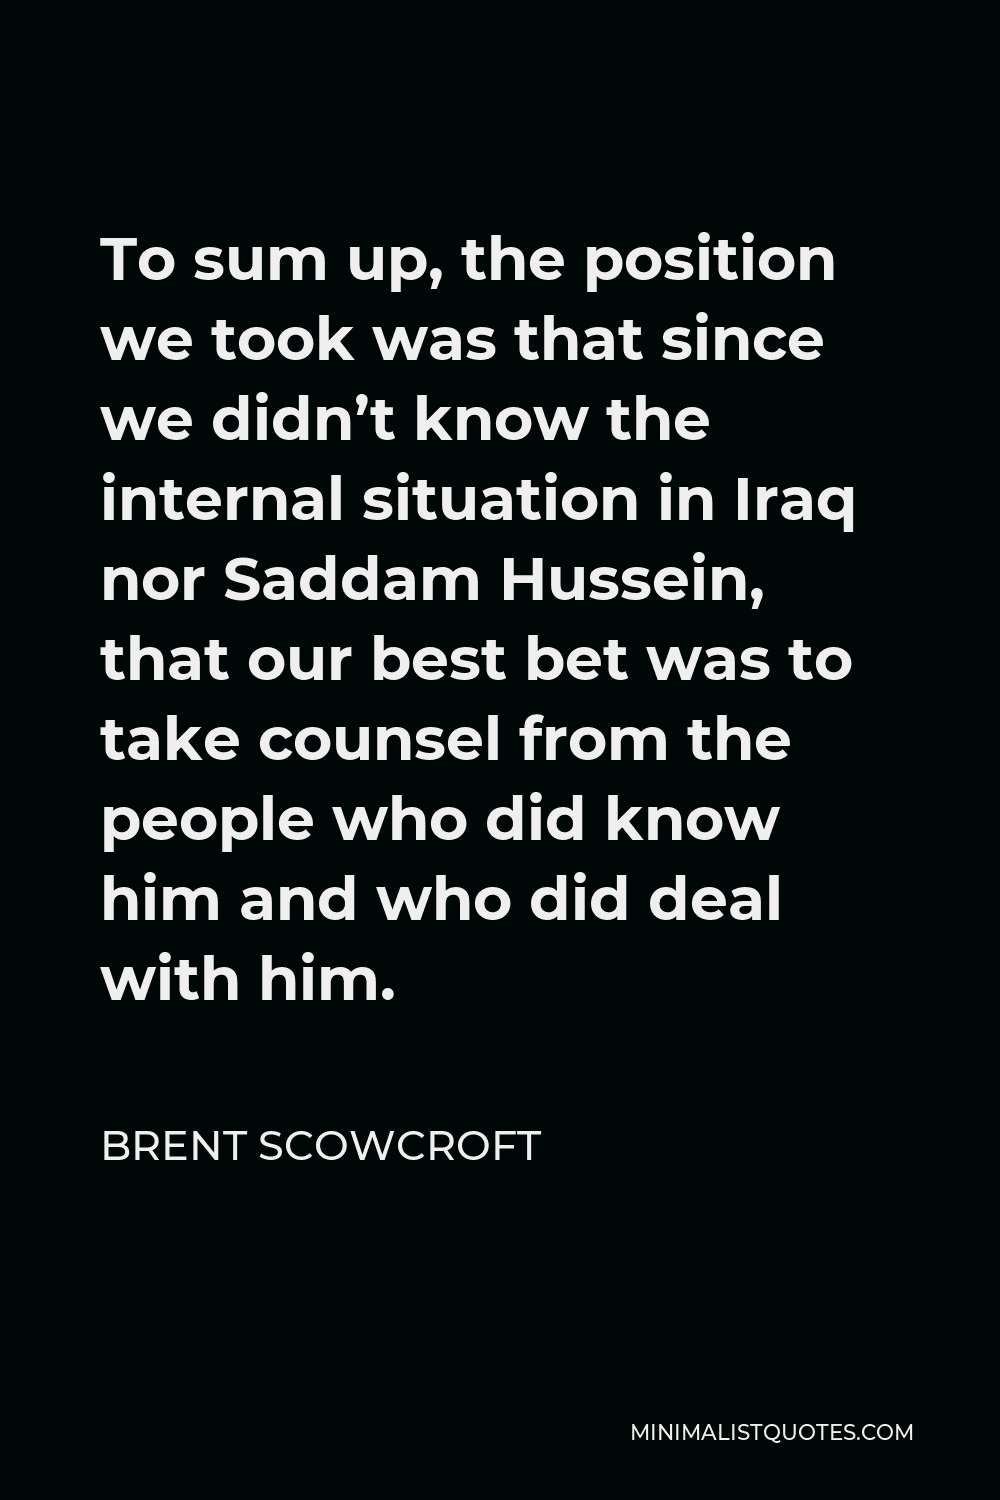 Brent Scowcroft Quote - To sum up, the position we took was that since we didn’t know the internal situation in Iraq nor Saddam Hussein, that our best bet was to take counsel from the people who did know him and who did deal with him.